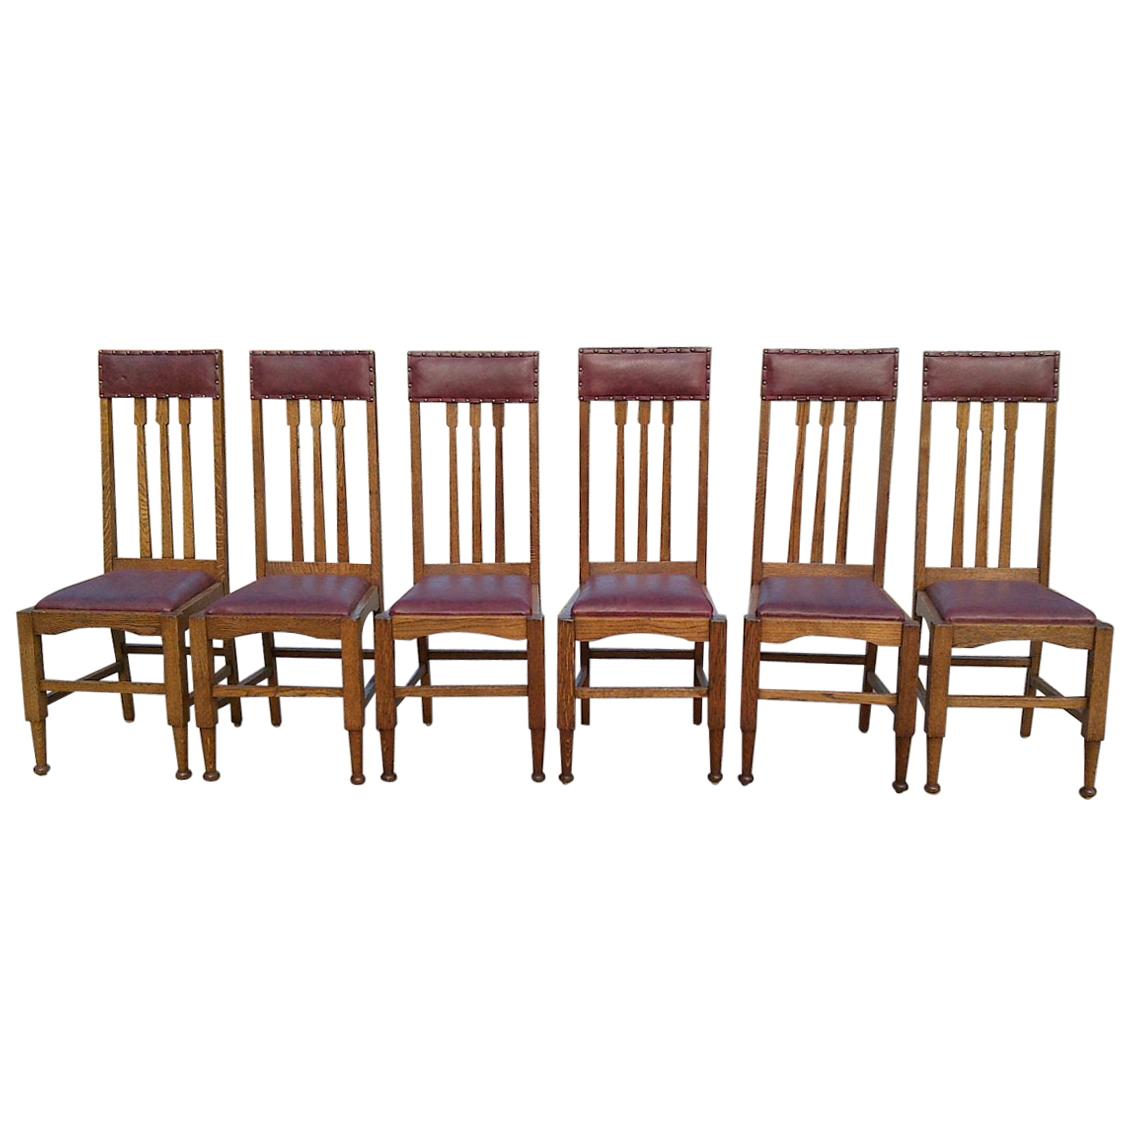 Eight Arts & Crafts Glasgow Style High Back Oak Dining Chairs with Leather Seats For Sale